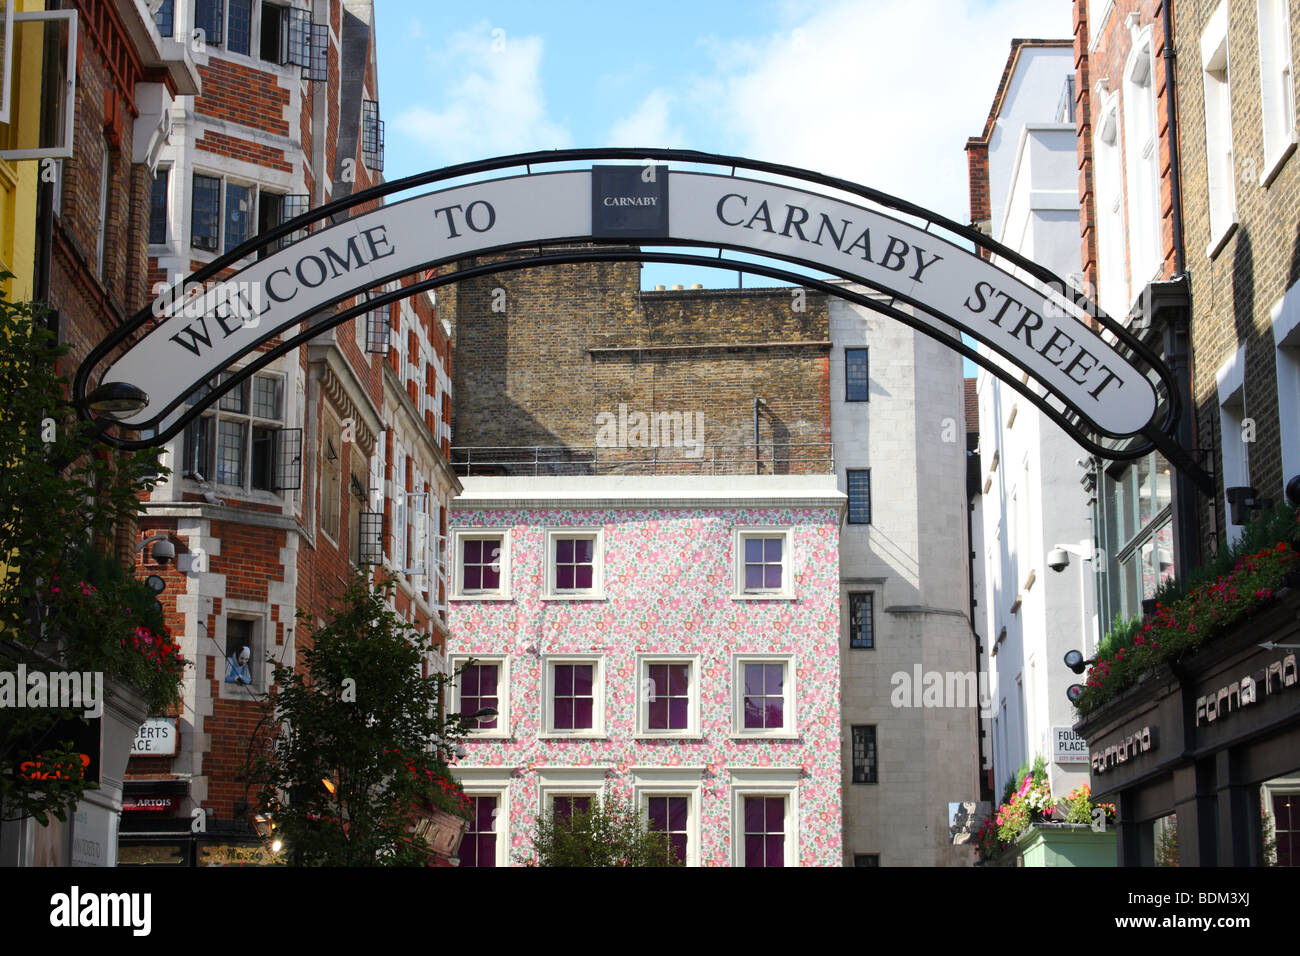 Carnaby Street, Soho, Londres, Angleterre, Royaume-Uni Banque D'Images